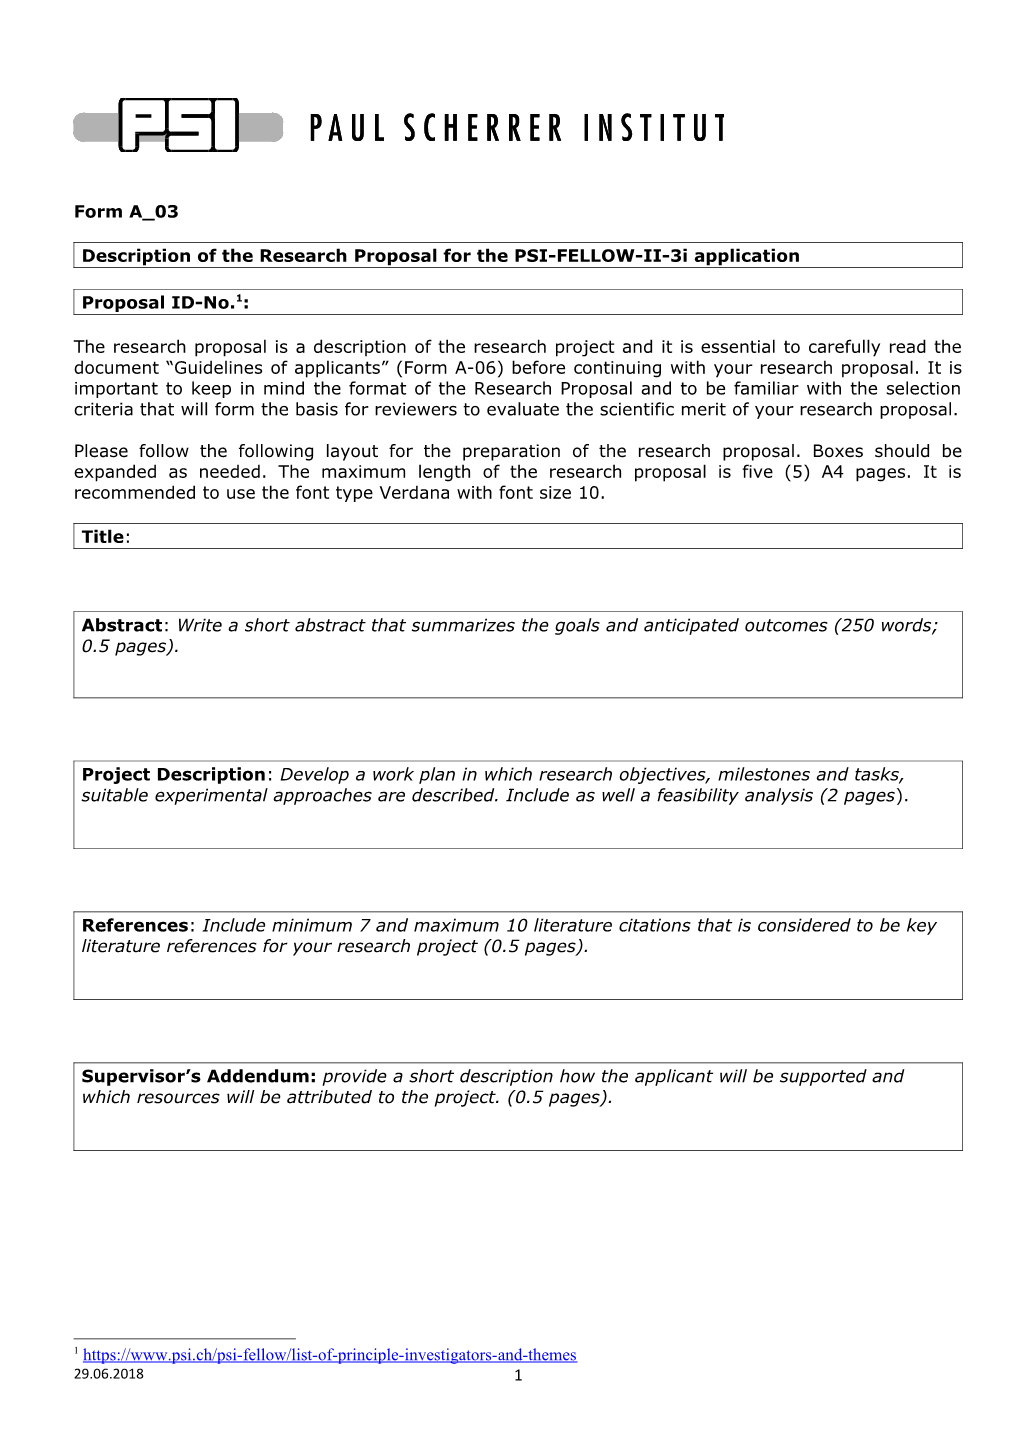 Description of the Research Proposal for the PSI-FELLOW-II-3I Application